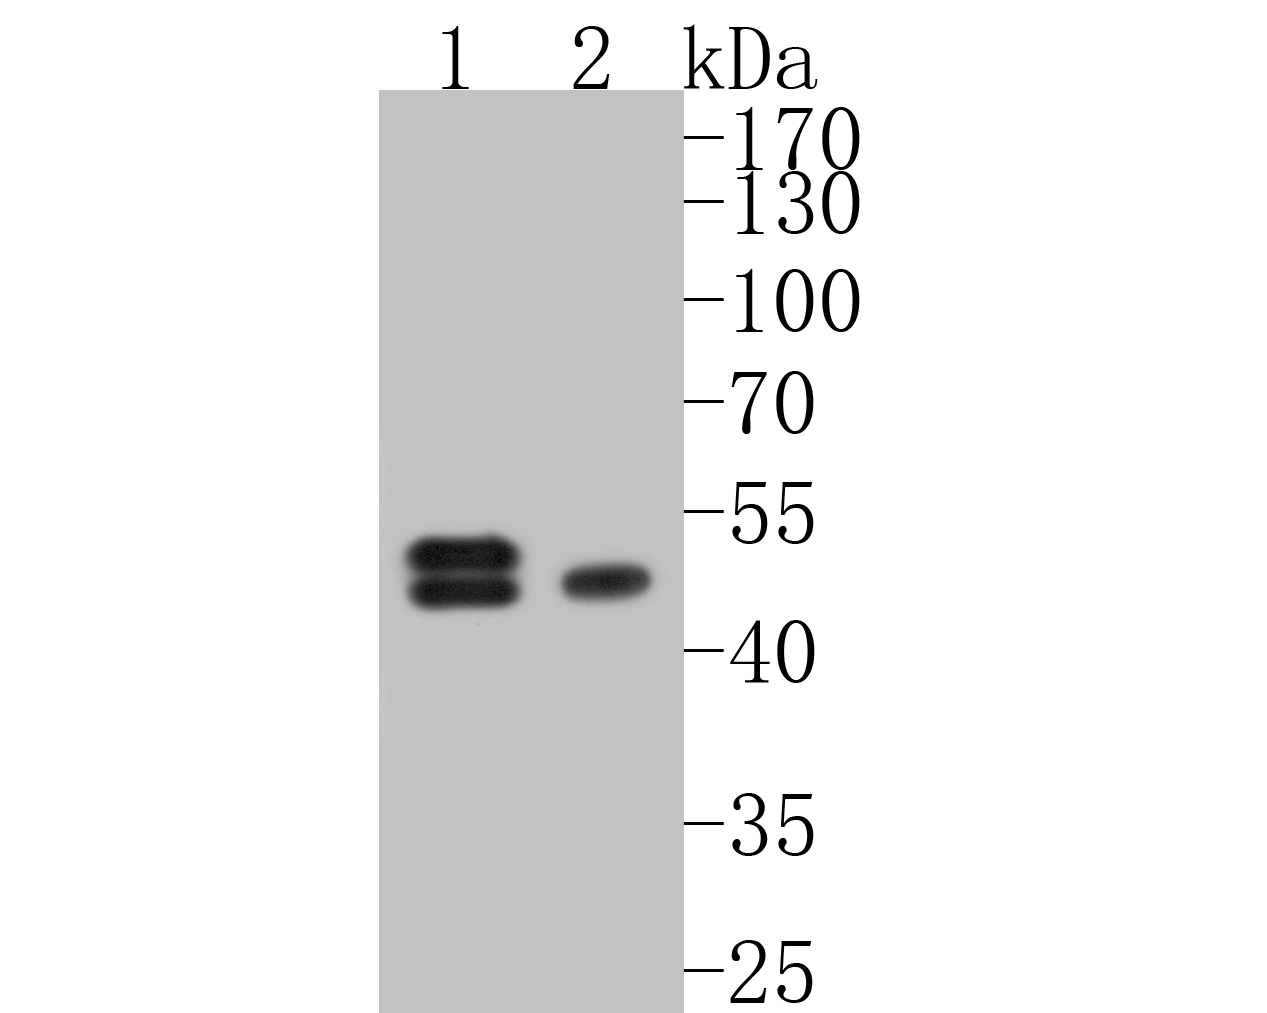 Western blot analysis of Cytokeratin 18 on different lysates. Proteins were transferred to a PVDF membrane and blocked with 5% BSA in PBS for 1 hour at room temperature. The primary antibody (HA600020, 1/500) was used in 5% BSA at room temperature for 2 hours. Goat Anti-Mouse IgG - HRP Secondary Antibody (HA1006) at 1:5,000 dilution was used for 1 hour at room temperature.<br />
Positive control: <br />
Lane 1: SK-Br-3 cell lysate<br />
Lane 2: A549 cell lysate